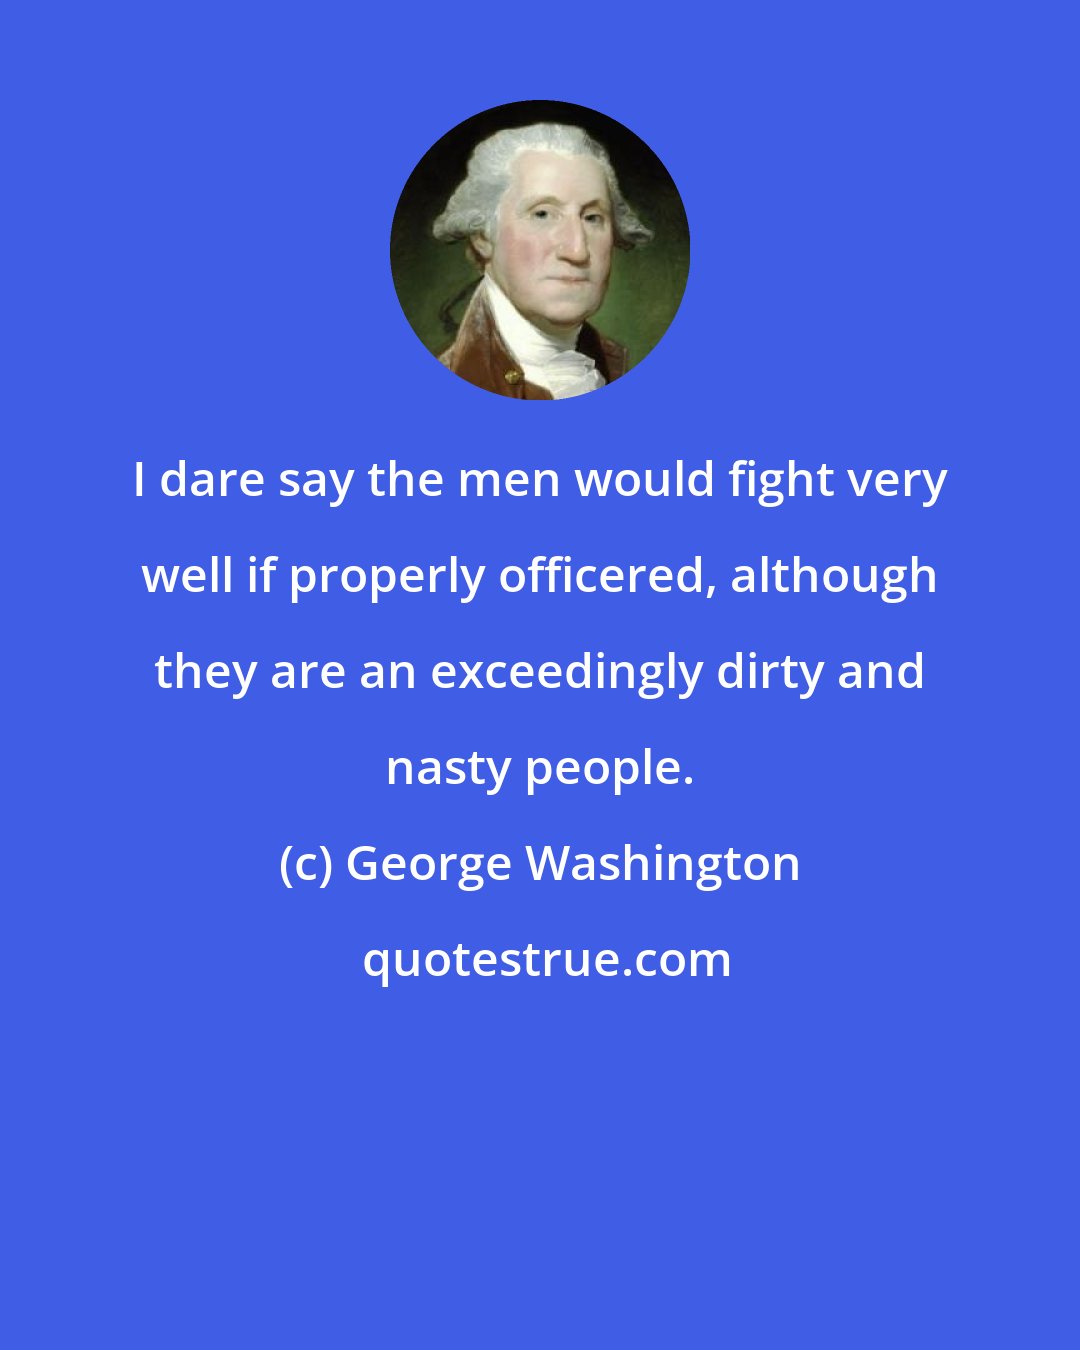 George Washington: I dare say the men would fight very well if properly officered, although they are an exceedingly dirty and nasty people.